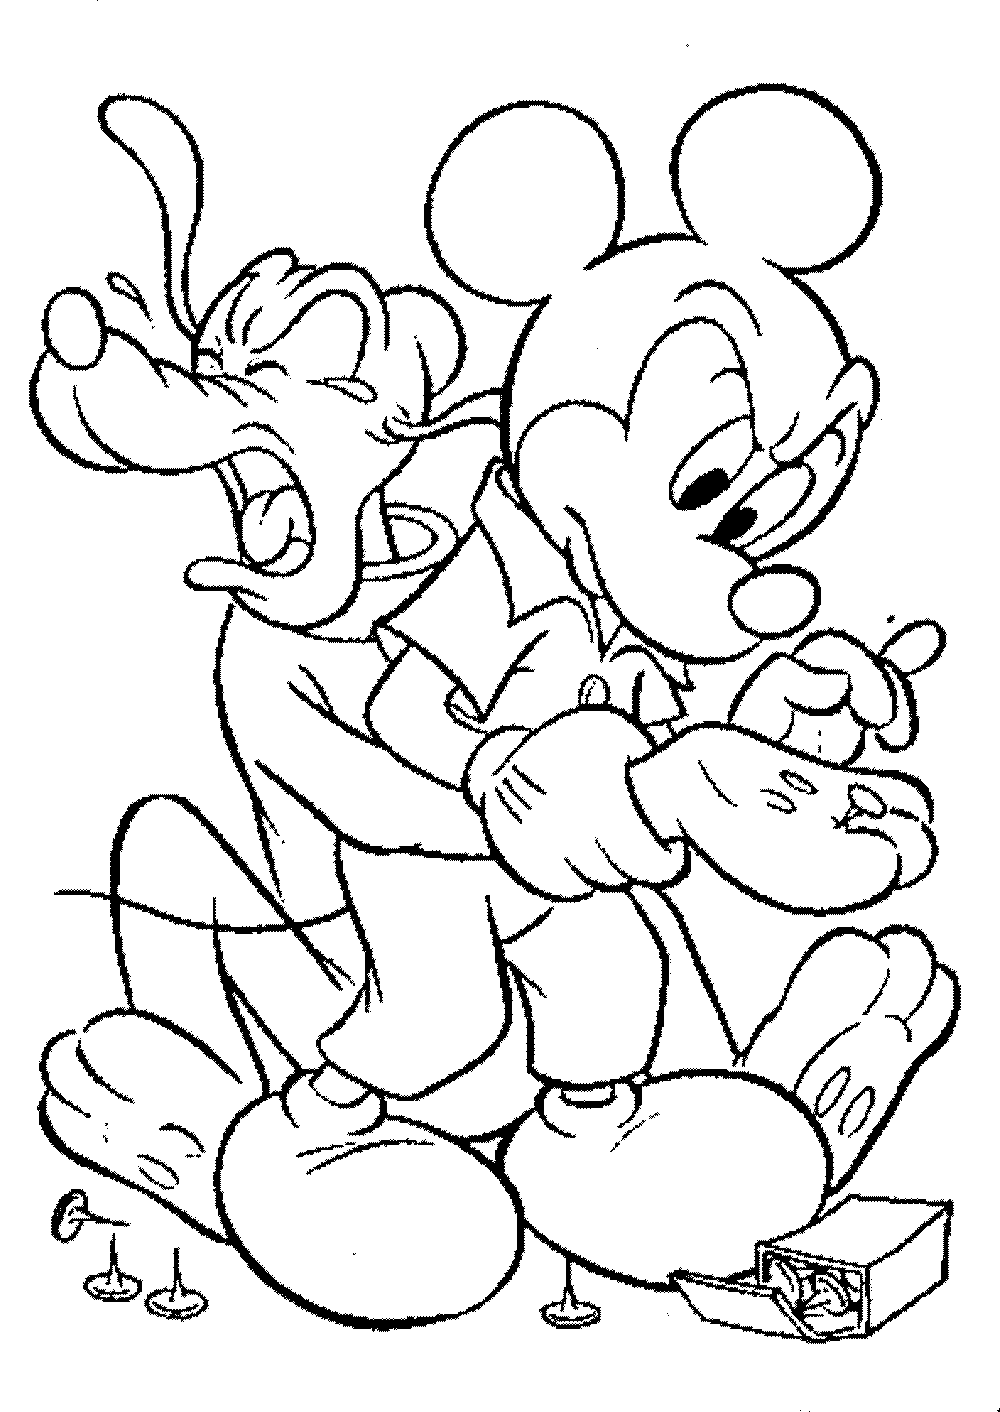 Learning Through Mickey Mouse Coloring Pages